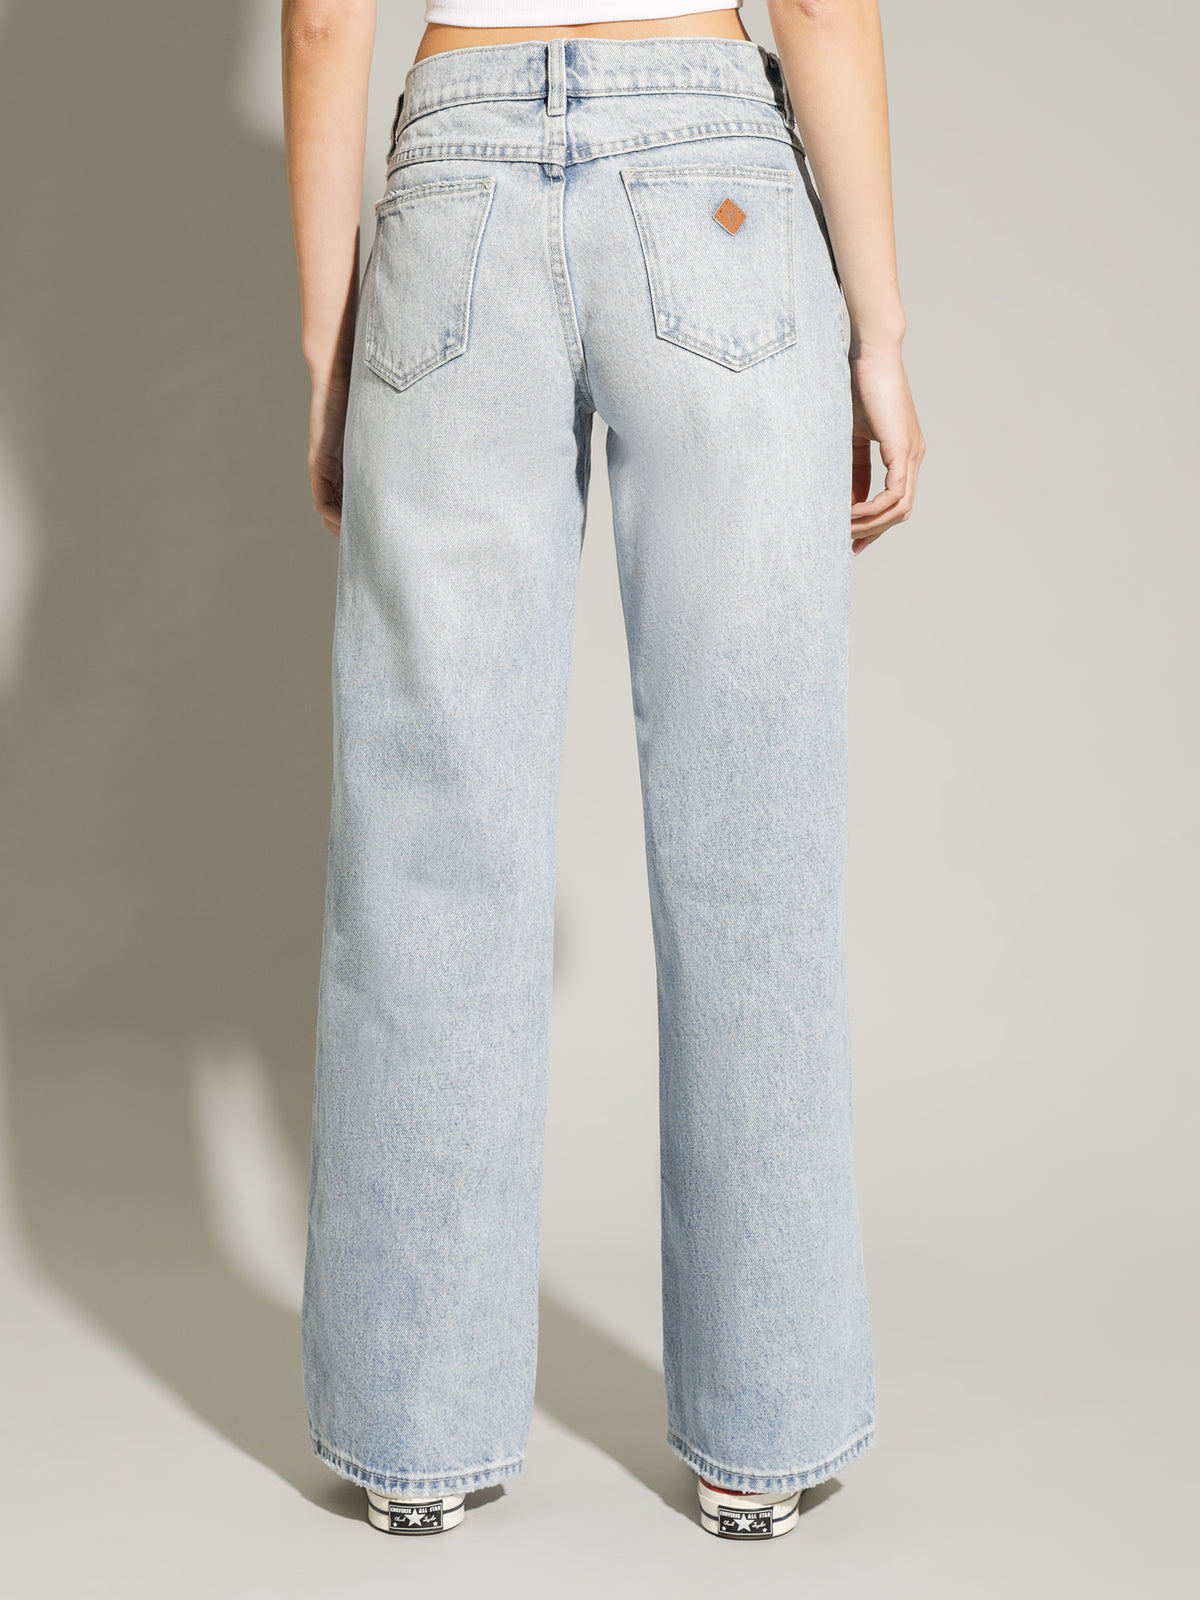 A 99 Low &amp; Wide Jeans in Mischa Organic Blue